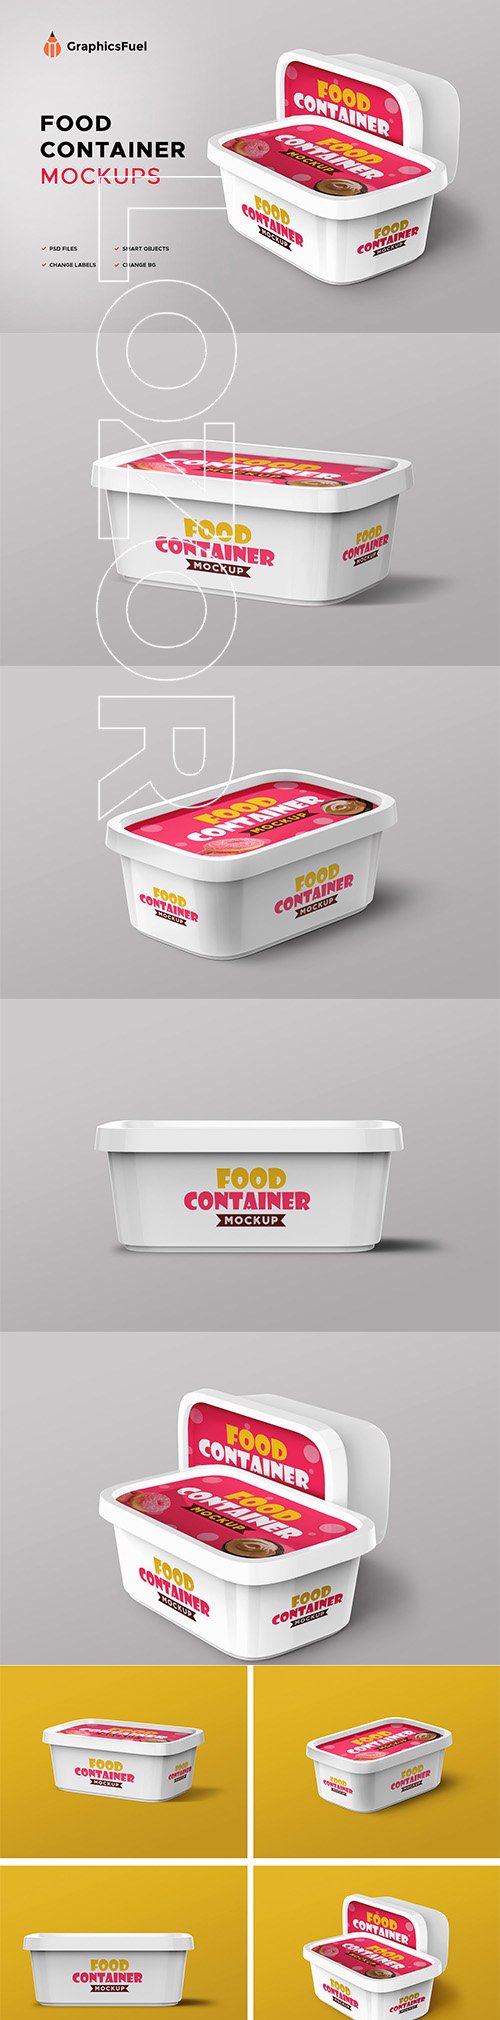 Plastic Food Container Mockups 4200027